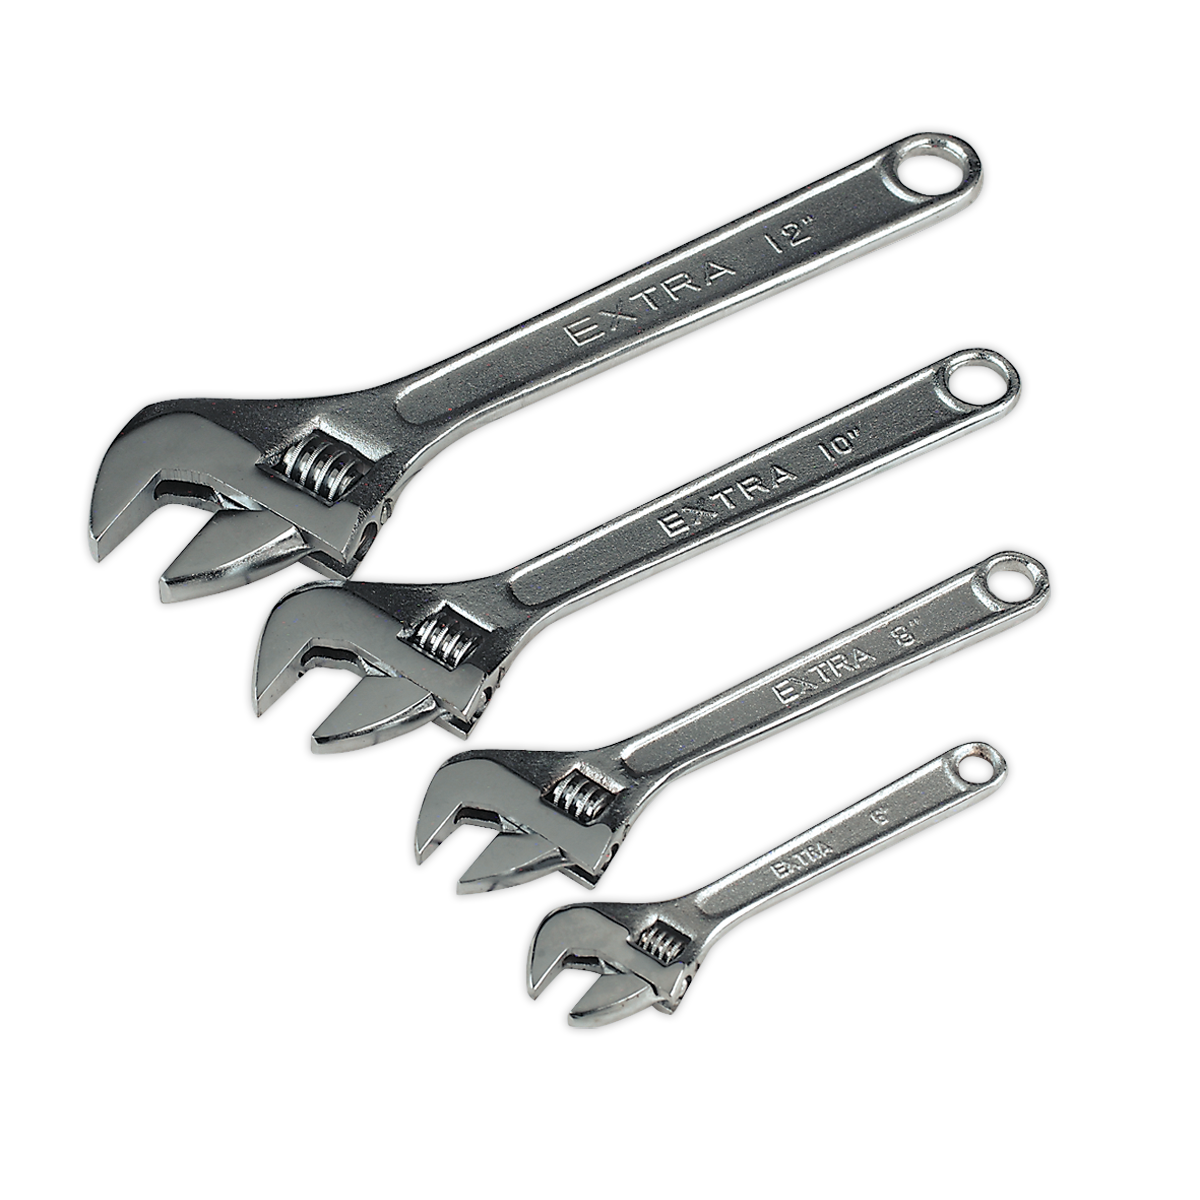 Sealey Adjustable Wrench Set 4pc 150, 200, 250 & 300mm